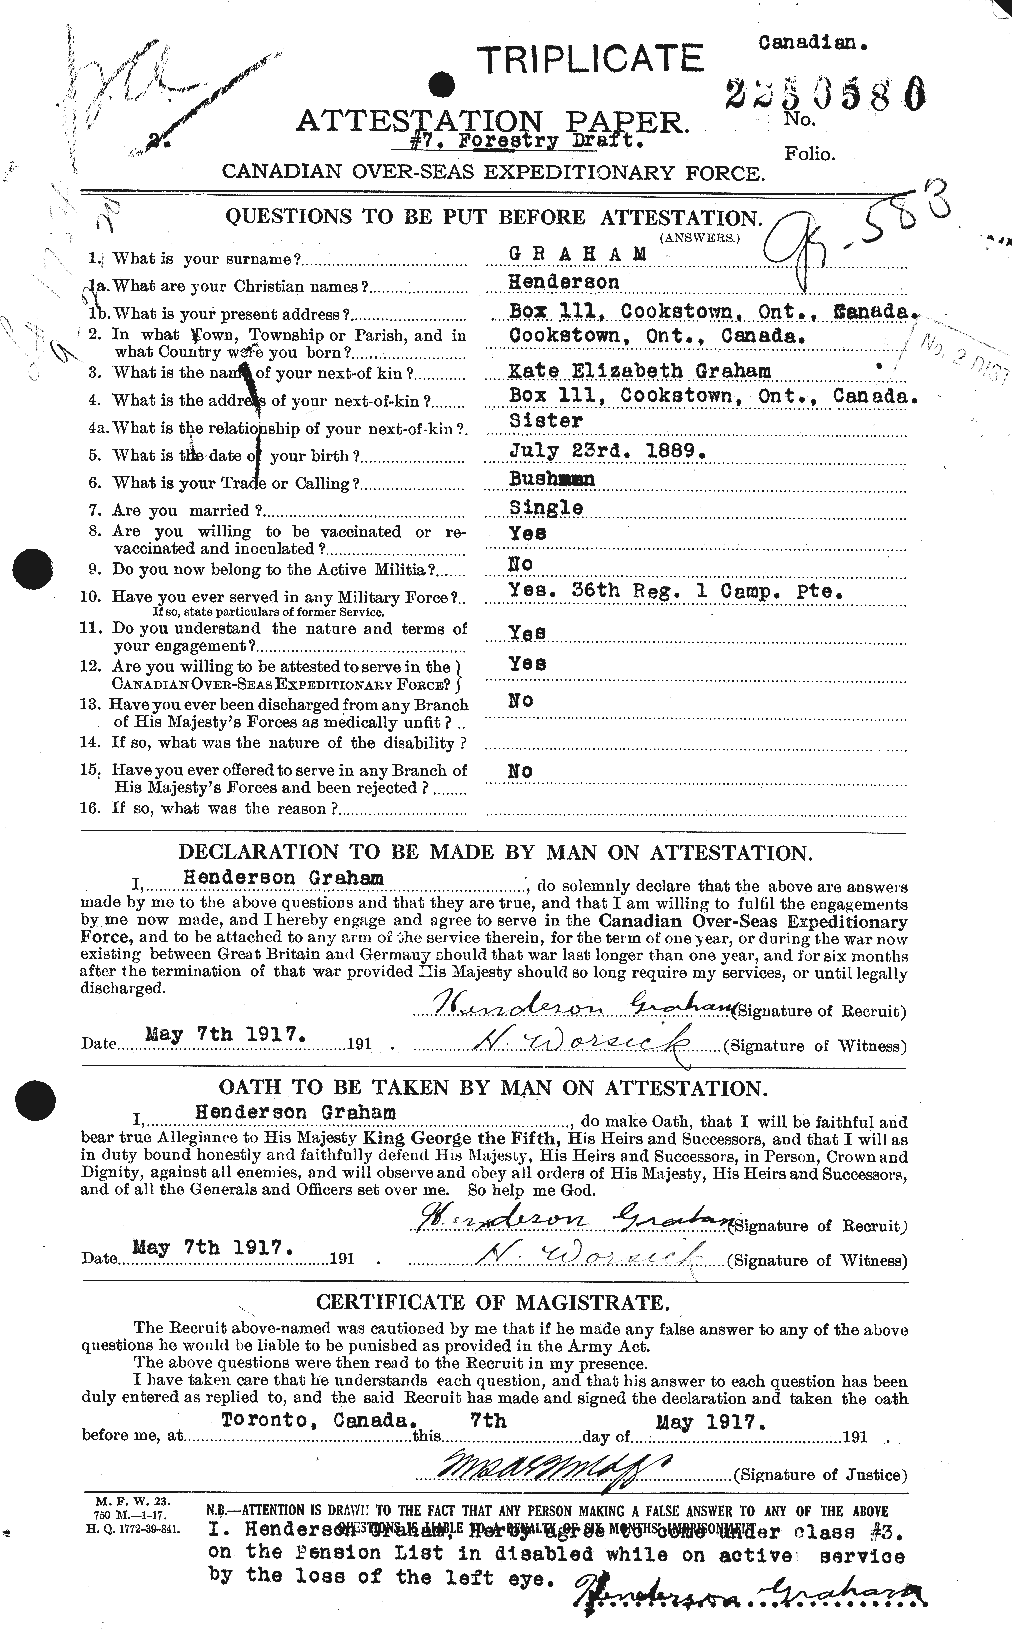 Personnel Records of the First World War - CEF 357733a